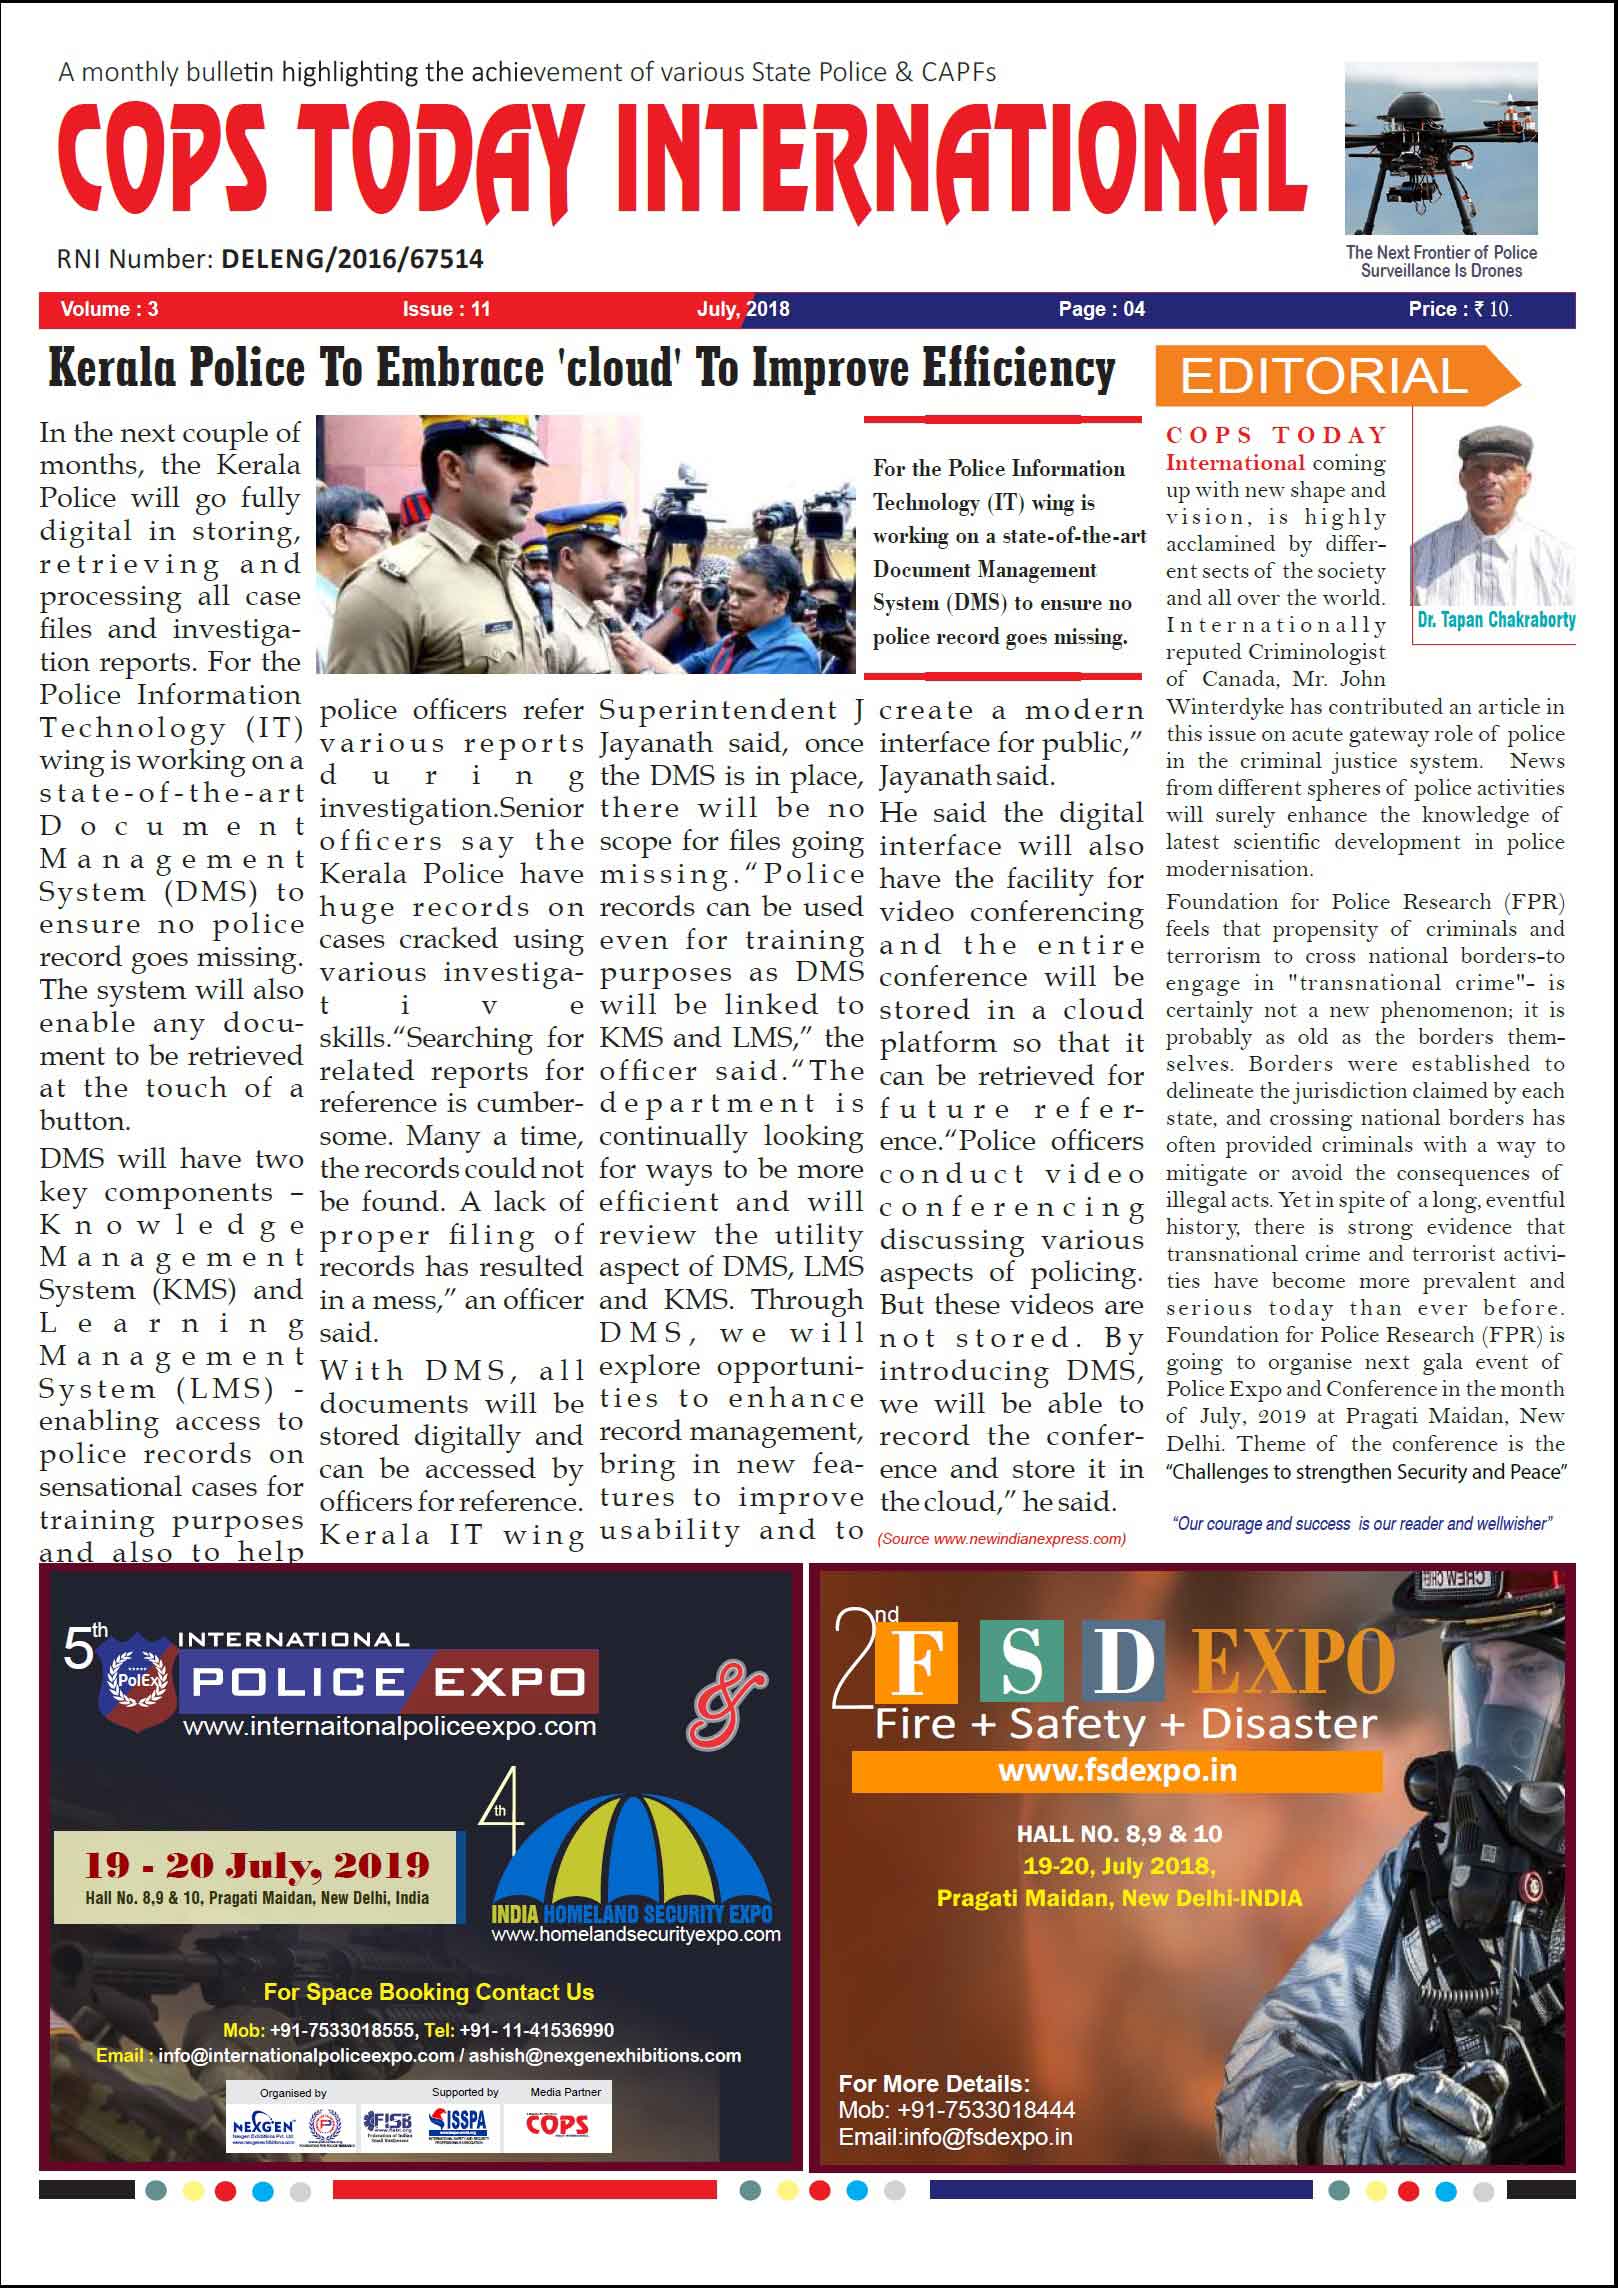 Cops Today News Paper of July 2018